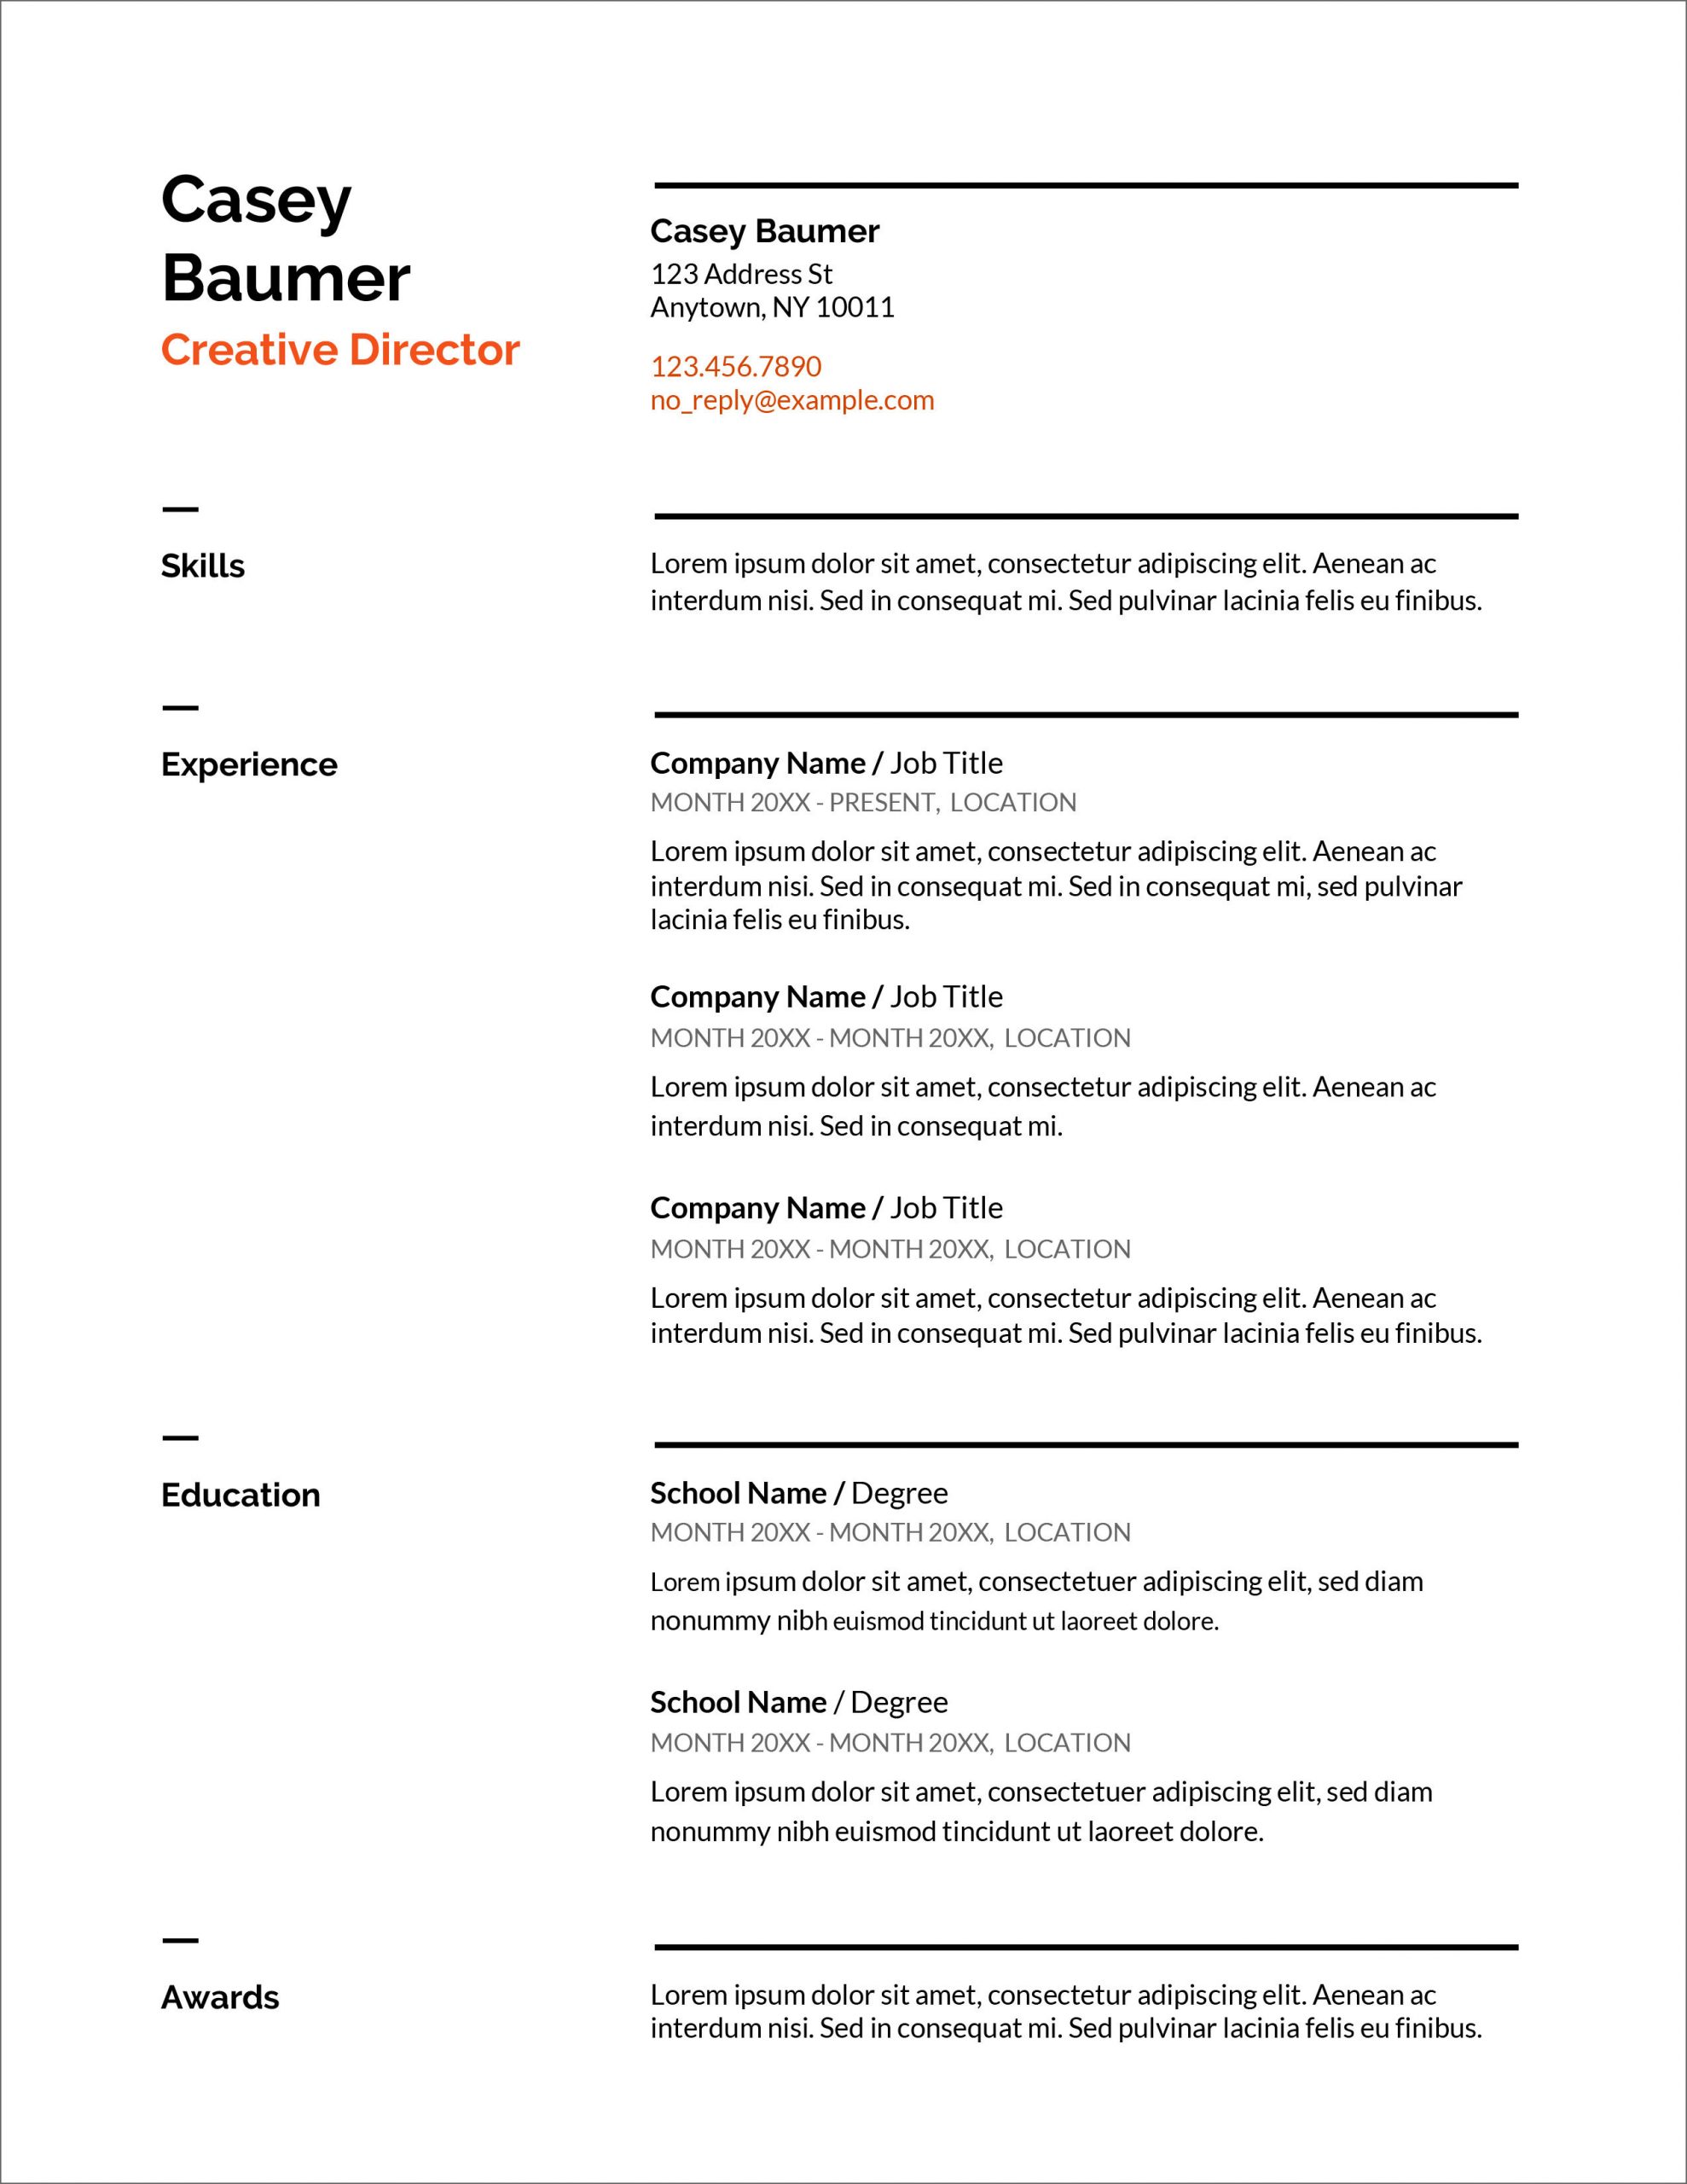 Resume Samples Doc Download for Freshers 45 Free Modern Resume / Cv Templates – Minimalist, Simple & Clean …